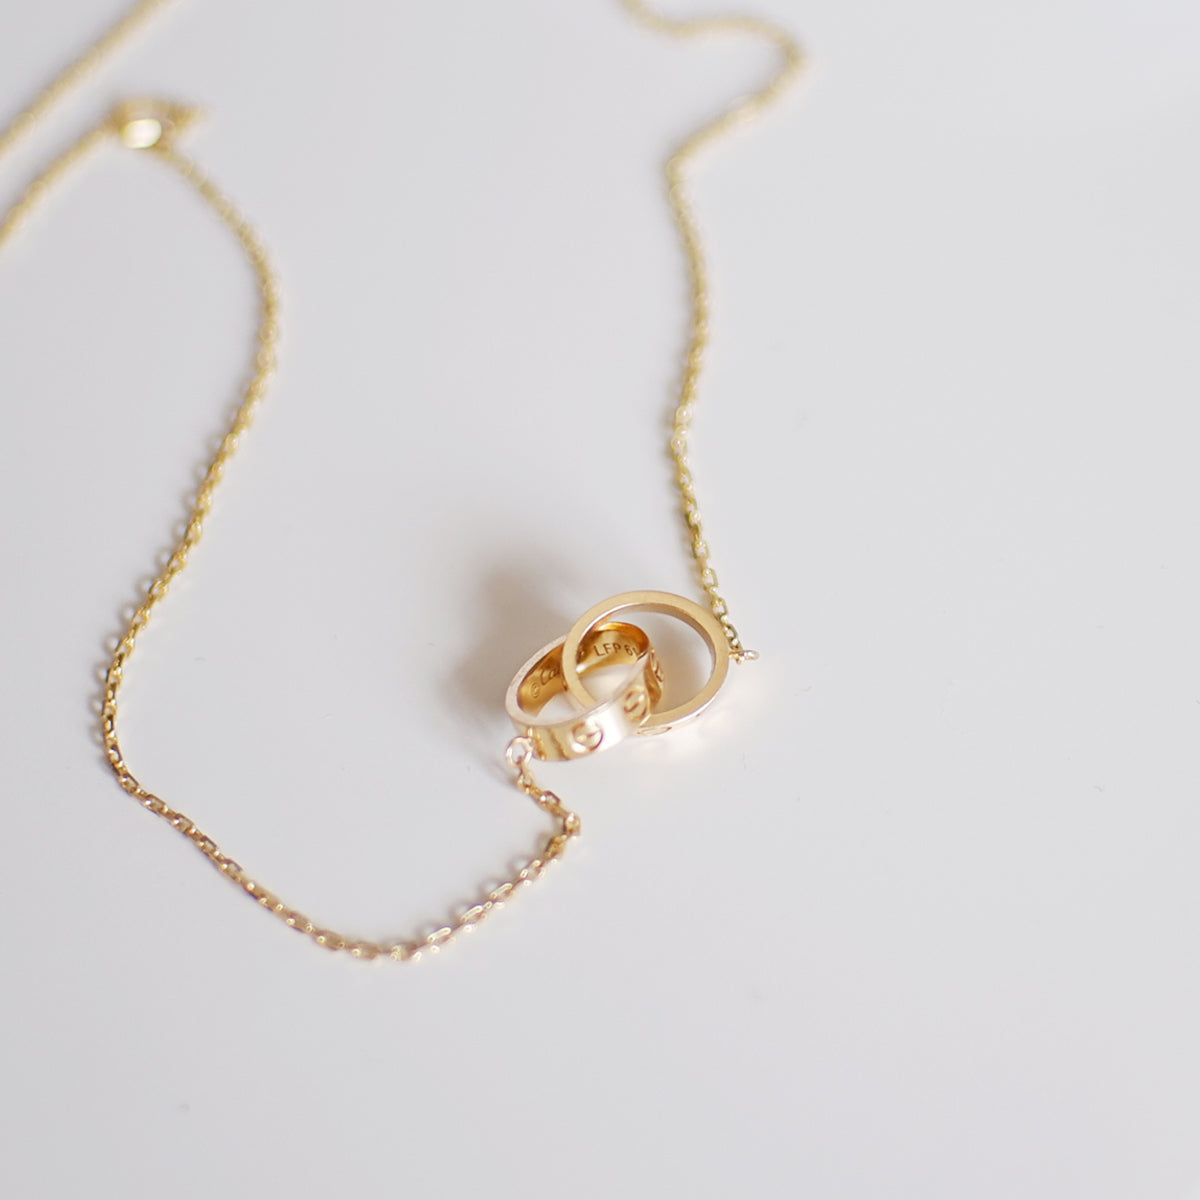 The Love Necklace in Solid Gold